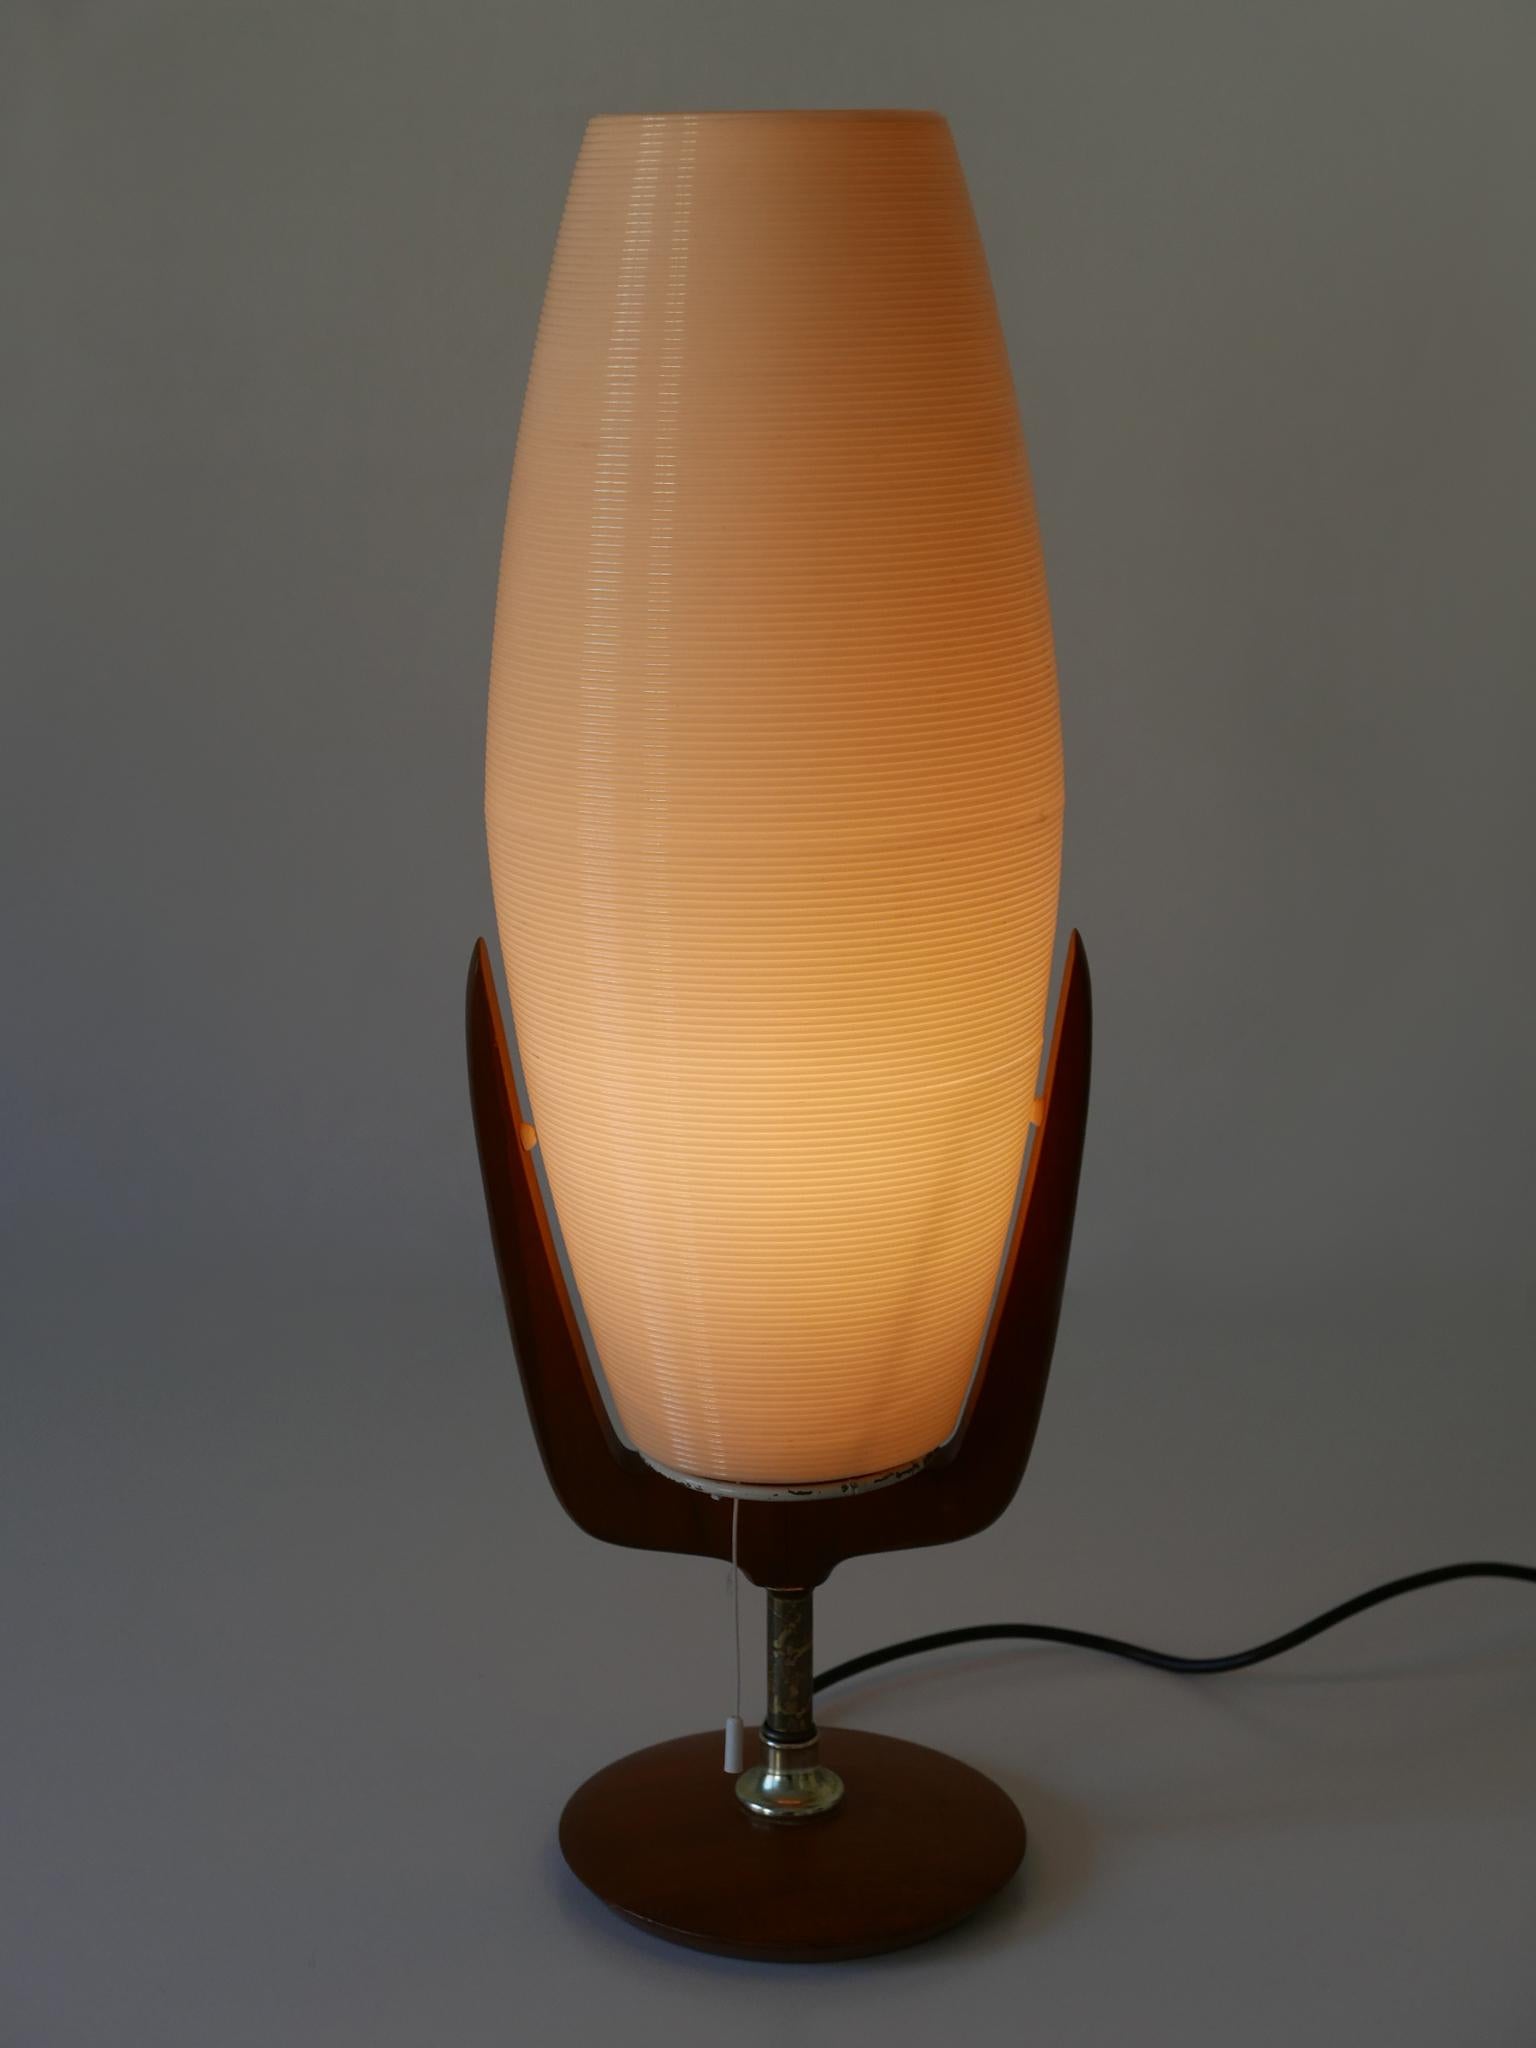 Large & Rare Mid-Century Modern Yasha Heifetz Rotaflex Table Lamp USA 1950s In Good Condition For Sale In Munich, DE